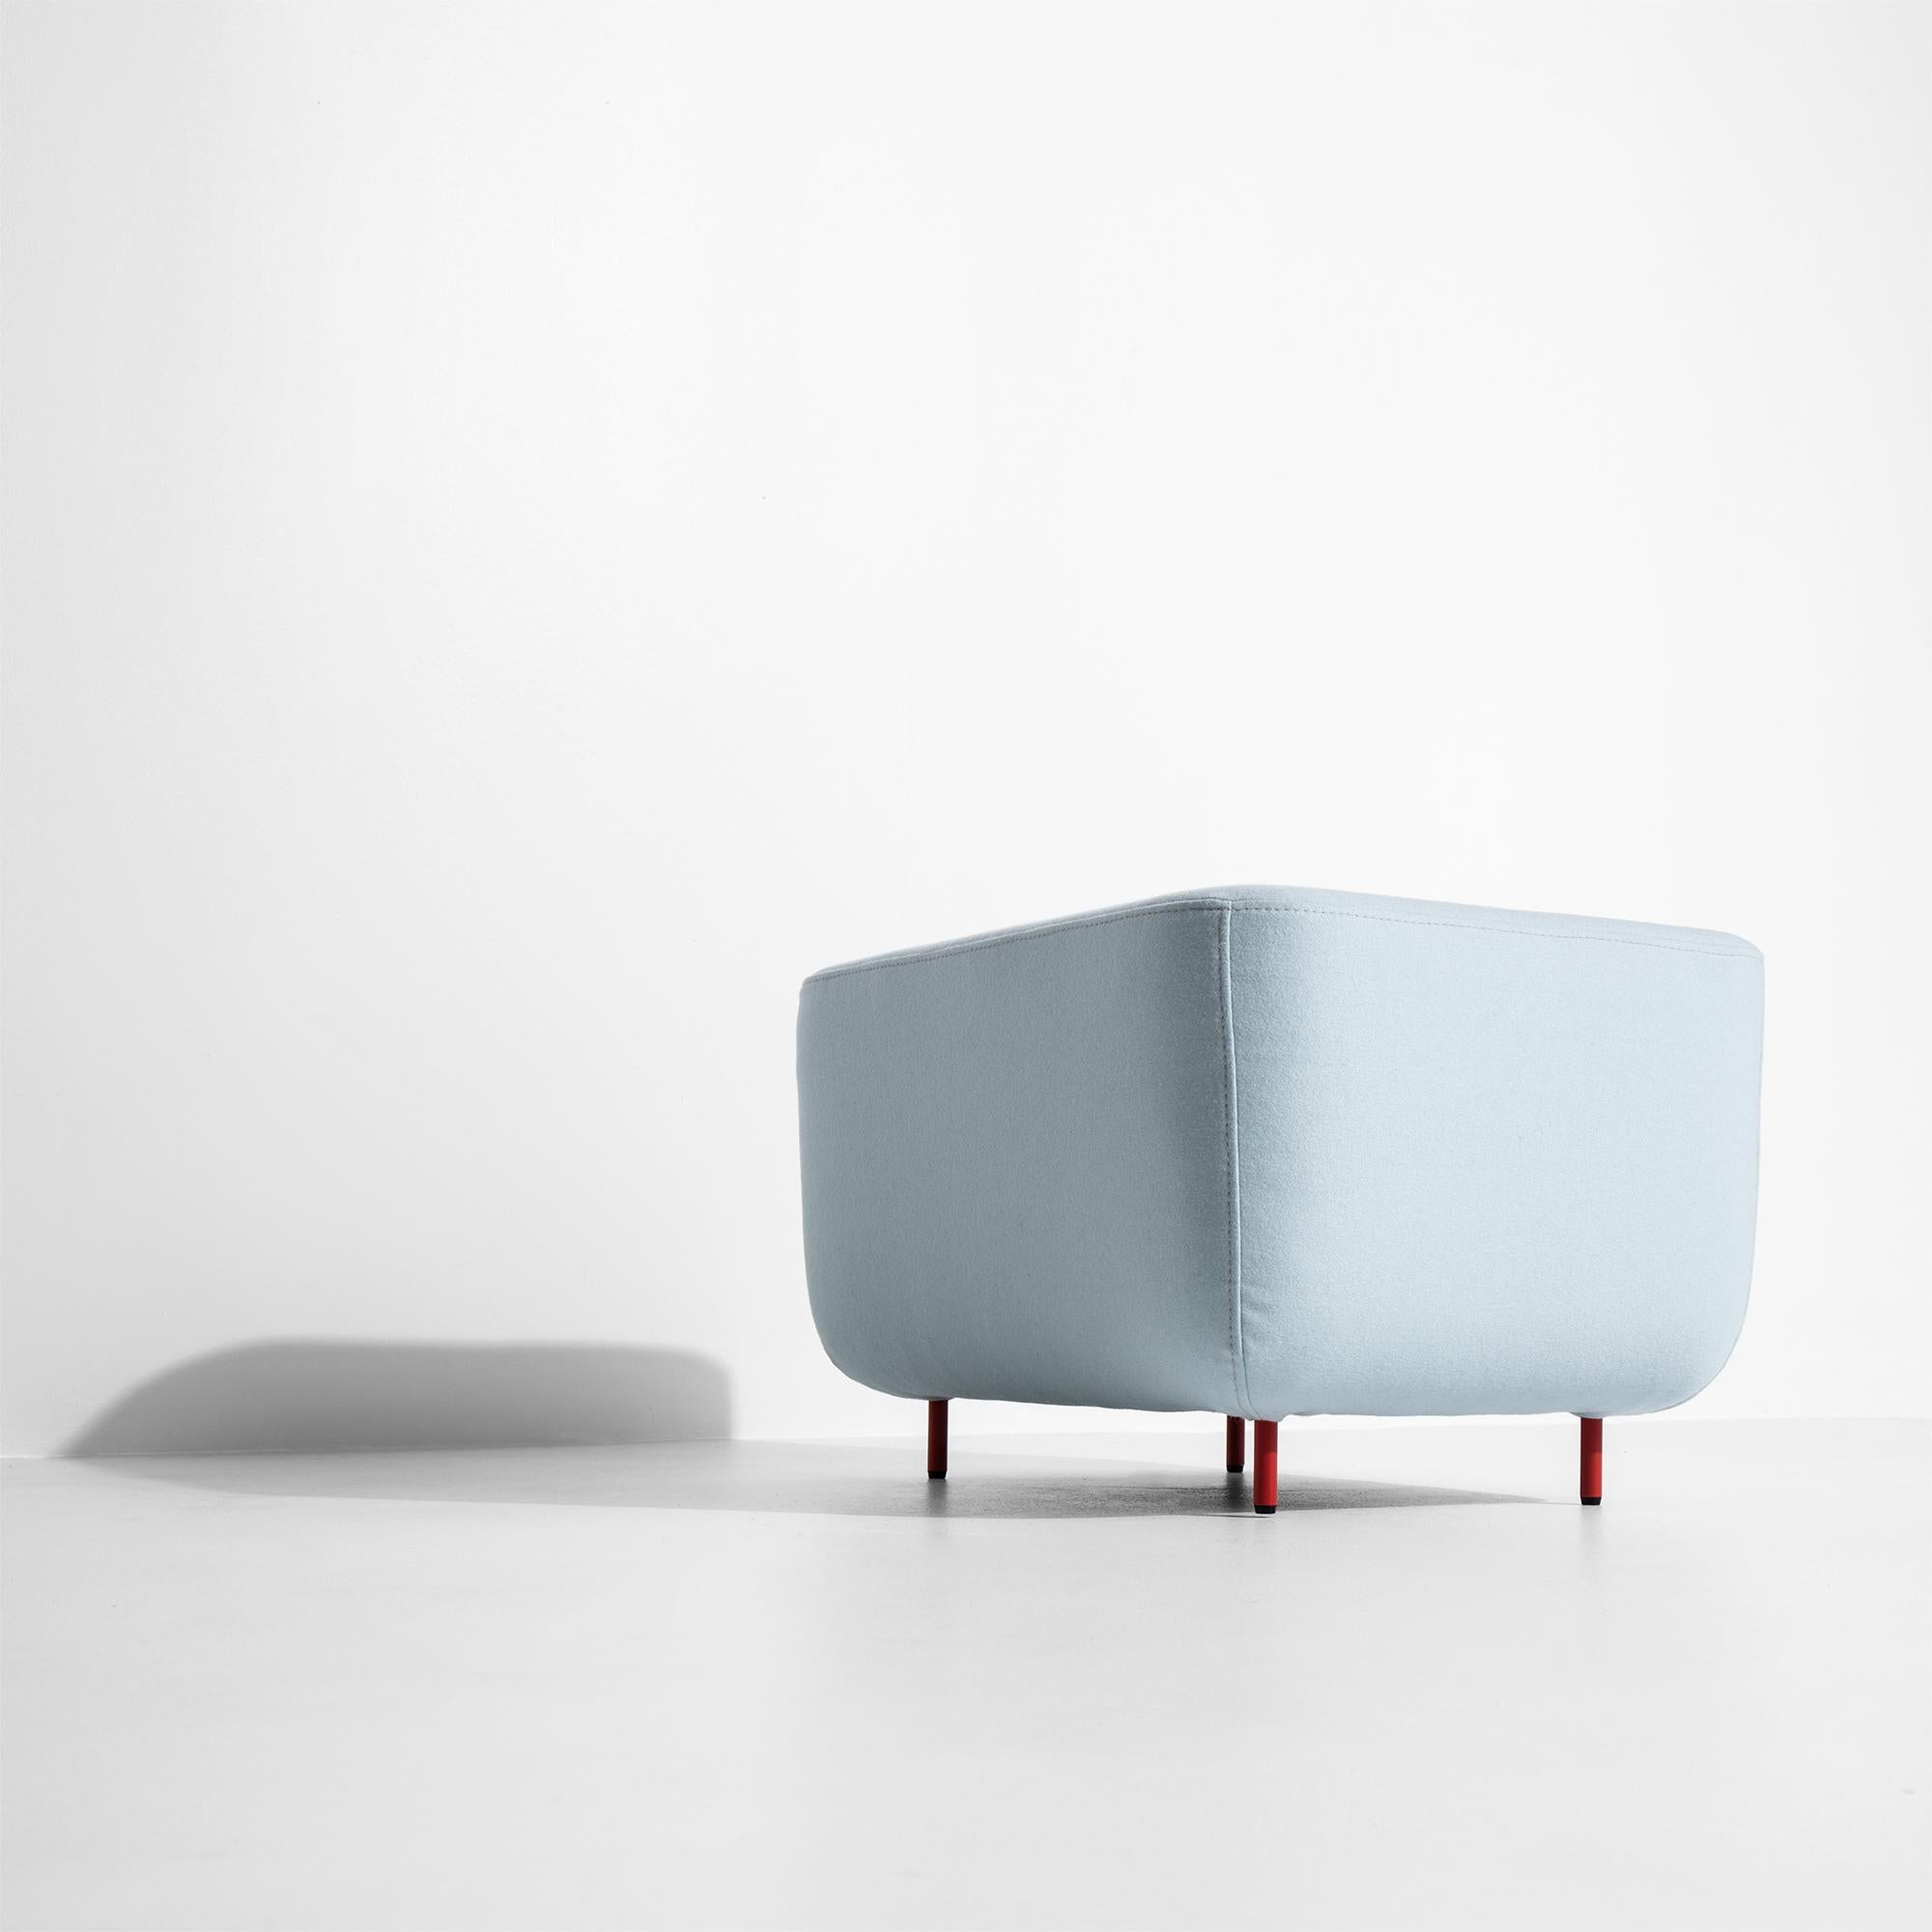 Petite Friture Small Hoff Stool in Blue by Morten & Jonas, 2015 In New Condition For Sale In Brooklyn, NY